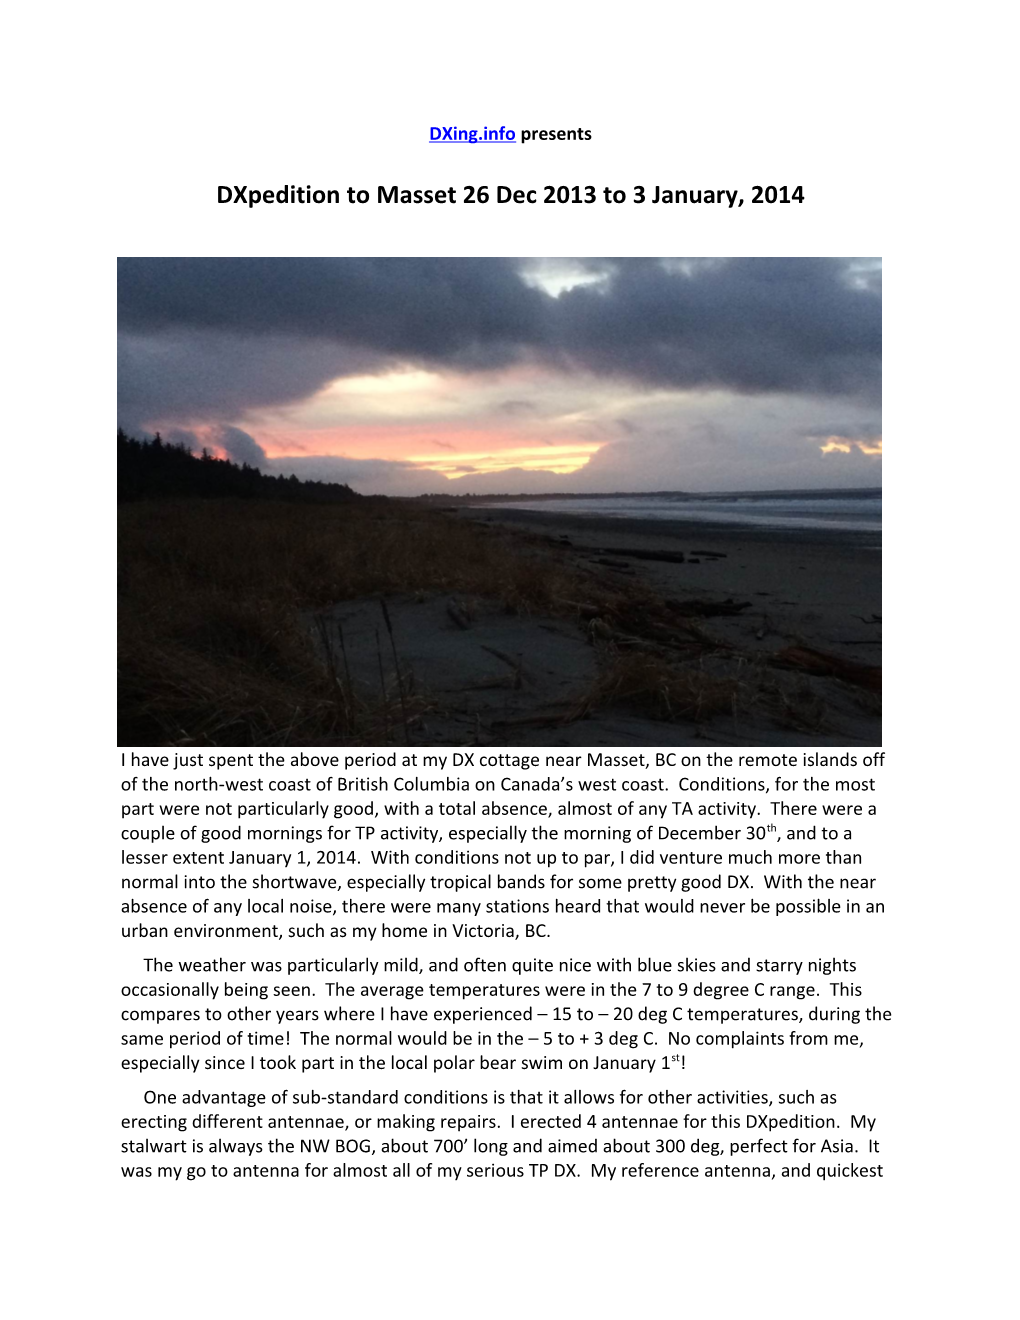 Dxpedition to Masset 26 Dec 2013 to 3 January, 2014